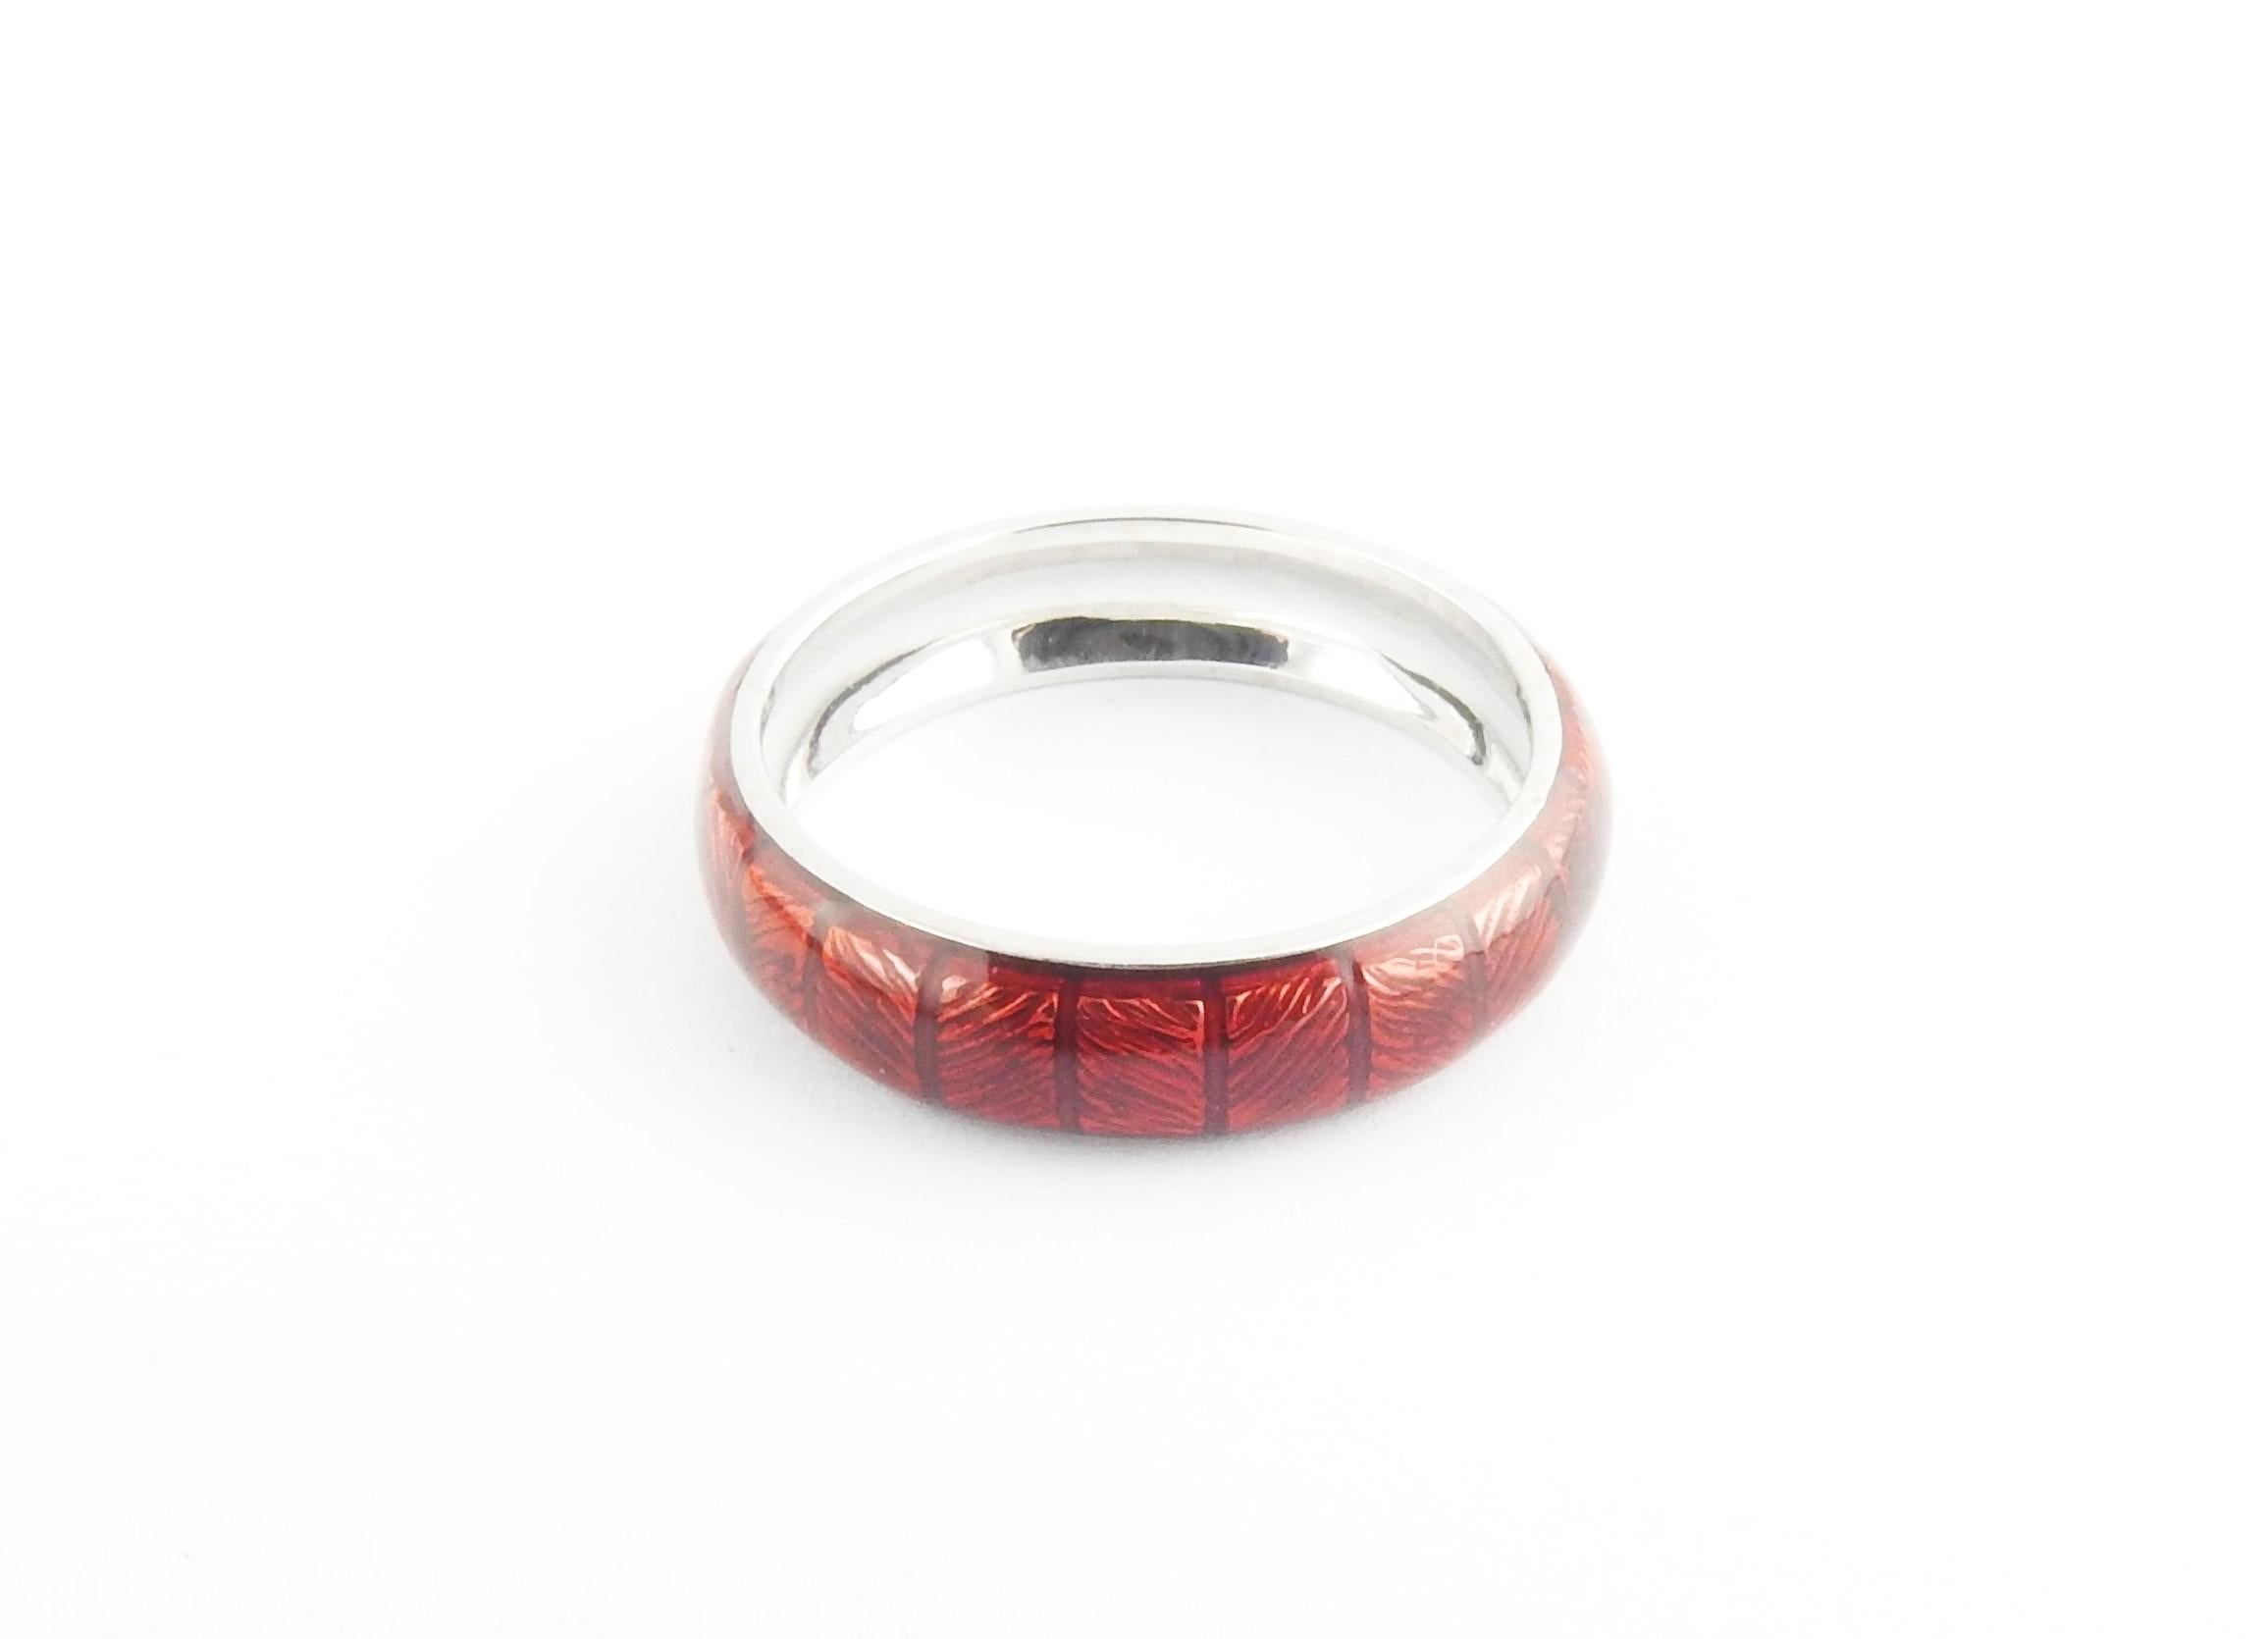 Vintage Hidalgo 18 Karat White Gold and Red Enamel Ring Size 7.5

This elegant band is crafted in 18K white gold and accented with beautifully detailed red enamel.

Width: 5 mm.

Ring Size: 7.5

Weight: 3.0 dwt. / 4.8 gr.

Hallmark: HIDALGO